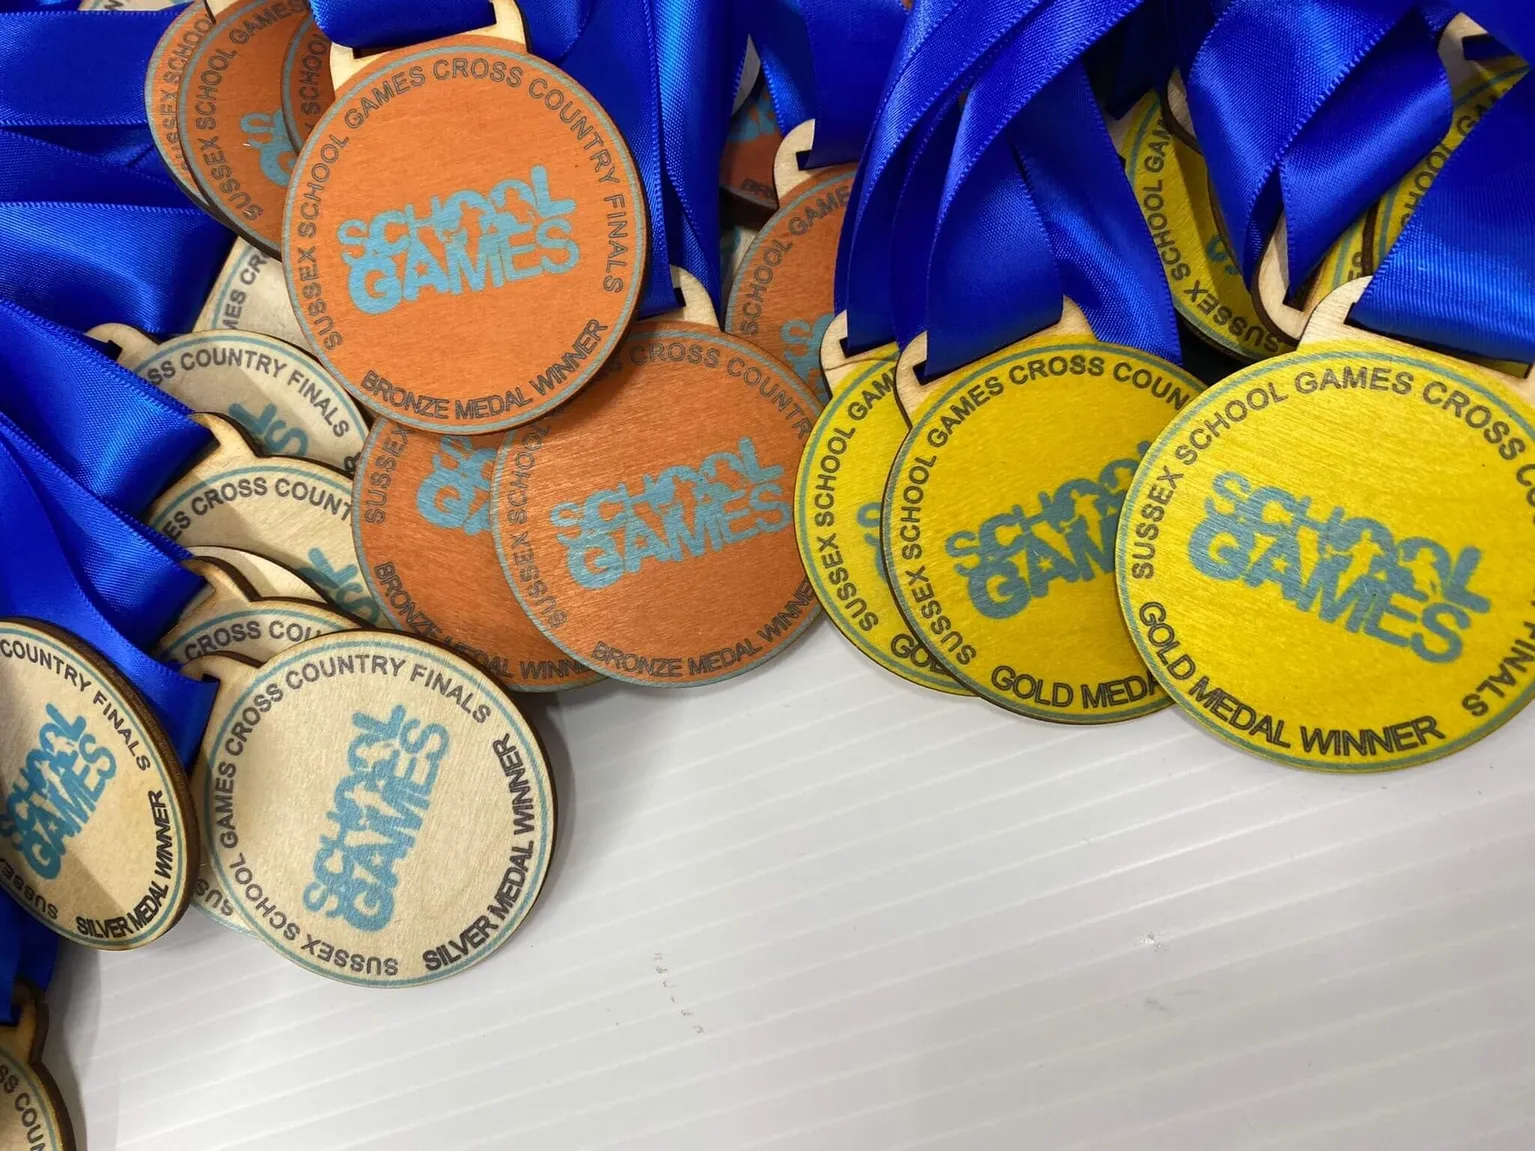 A collection of colourful medals featuring vibrant blue ribbons.